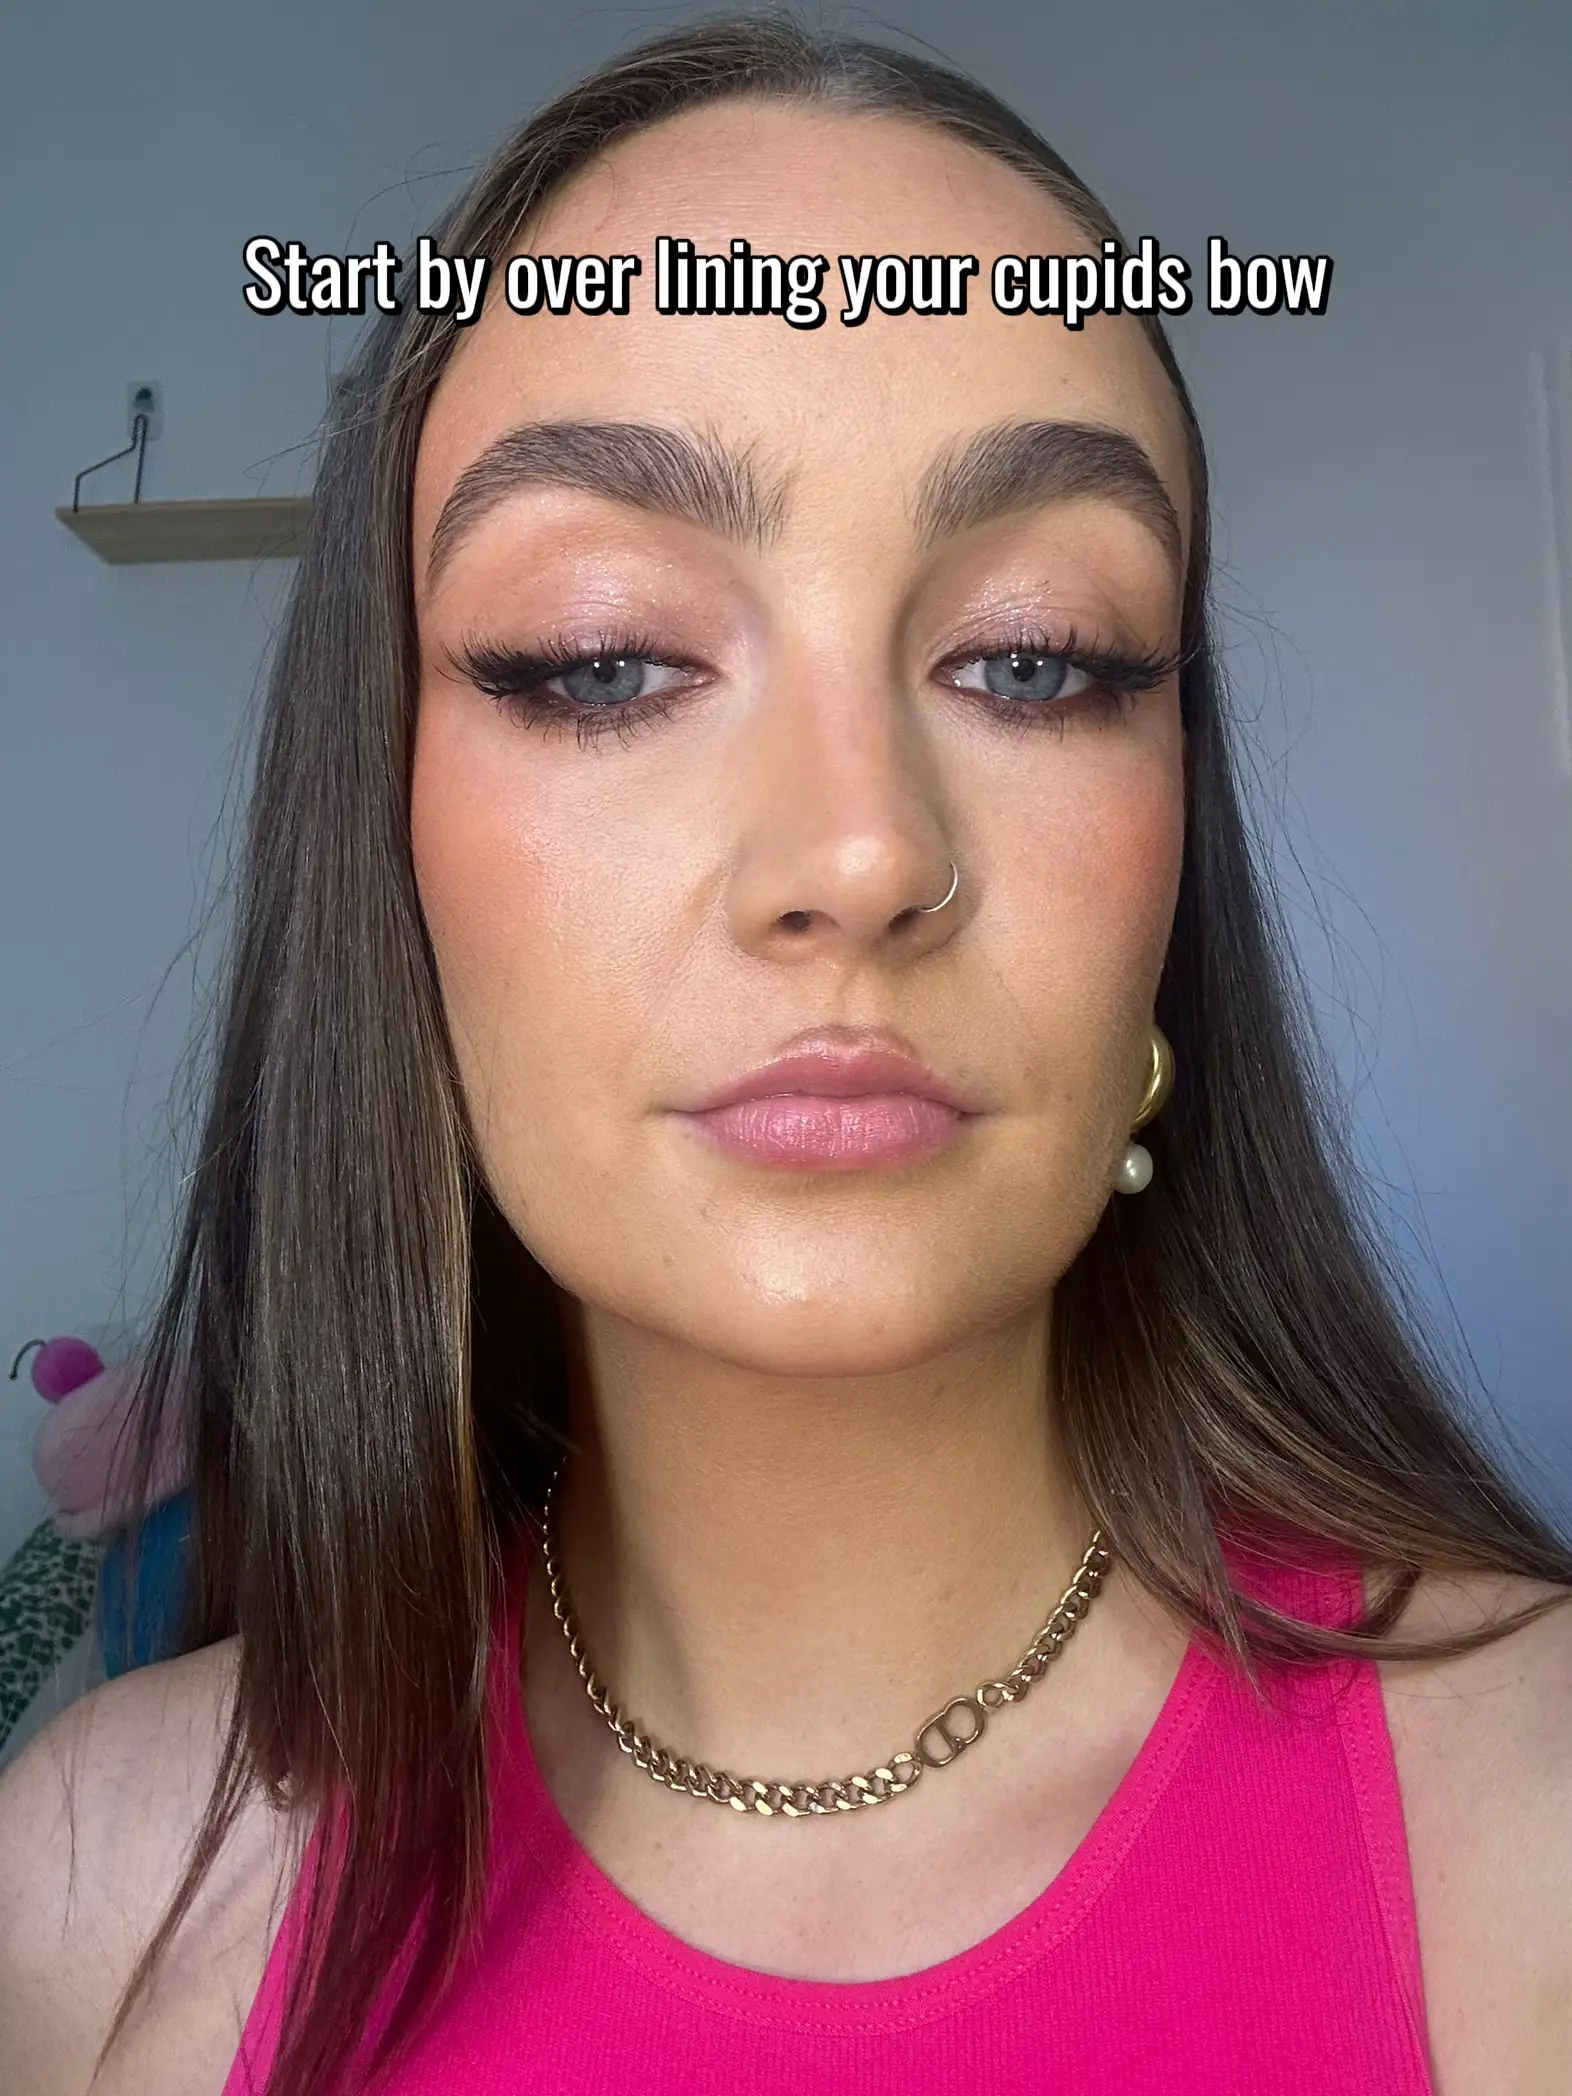 Makeup Hack for a Perfect Cupid's Bow